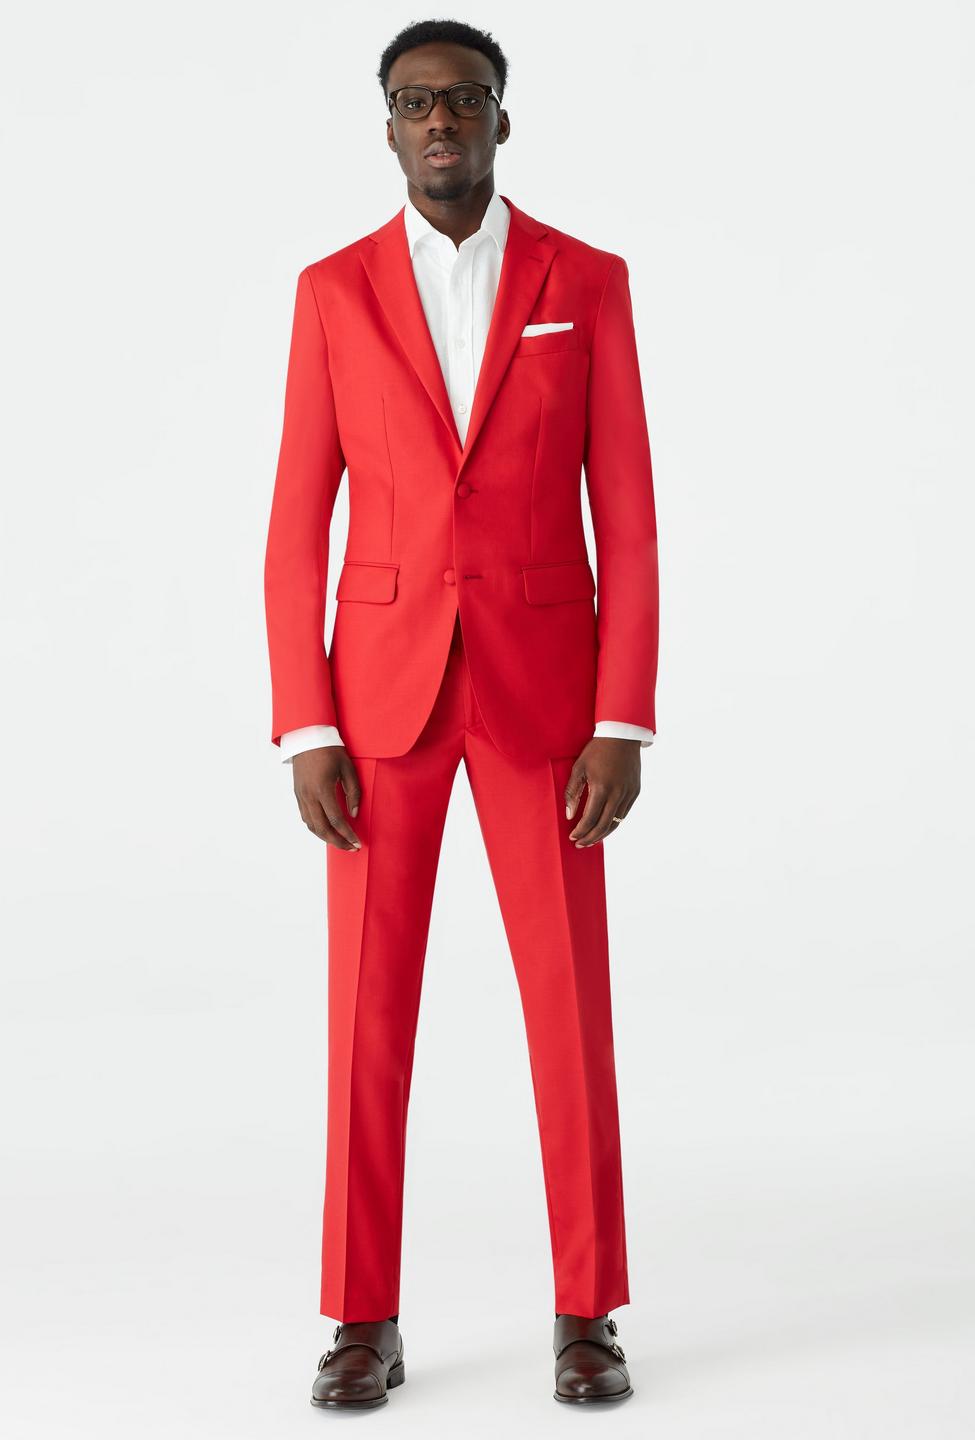 Red suit - Harrogate Solid Design from Luxury Indochino Collection